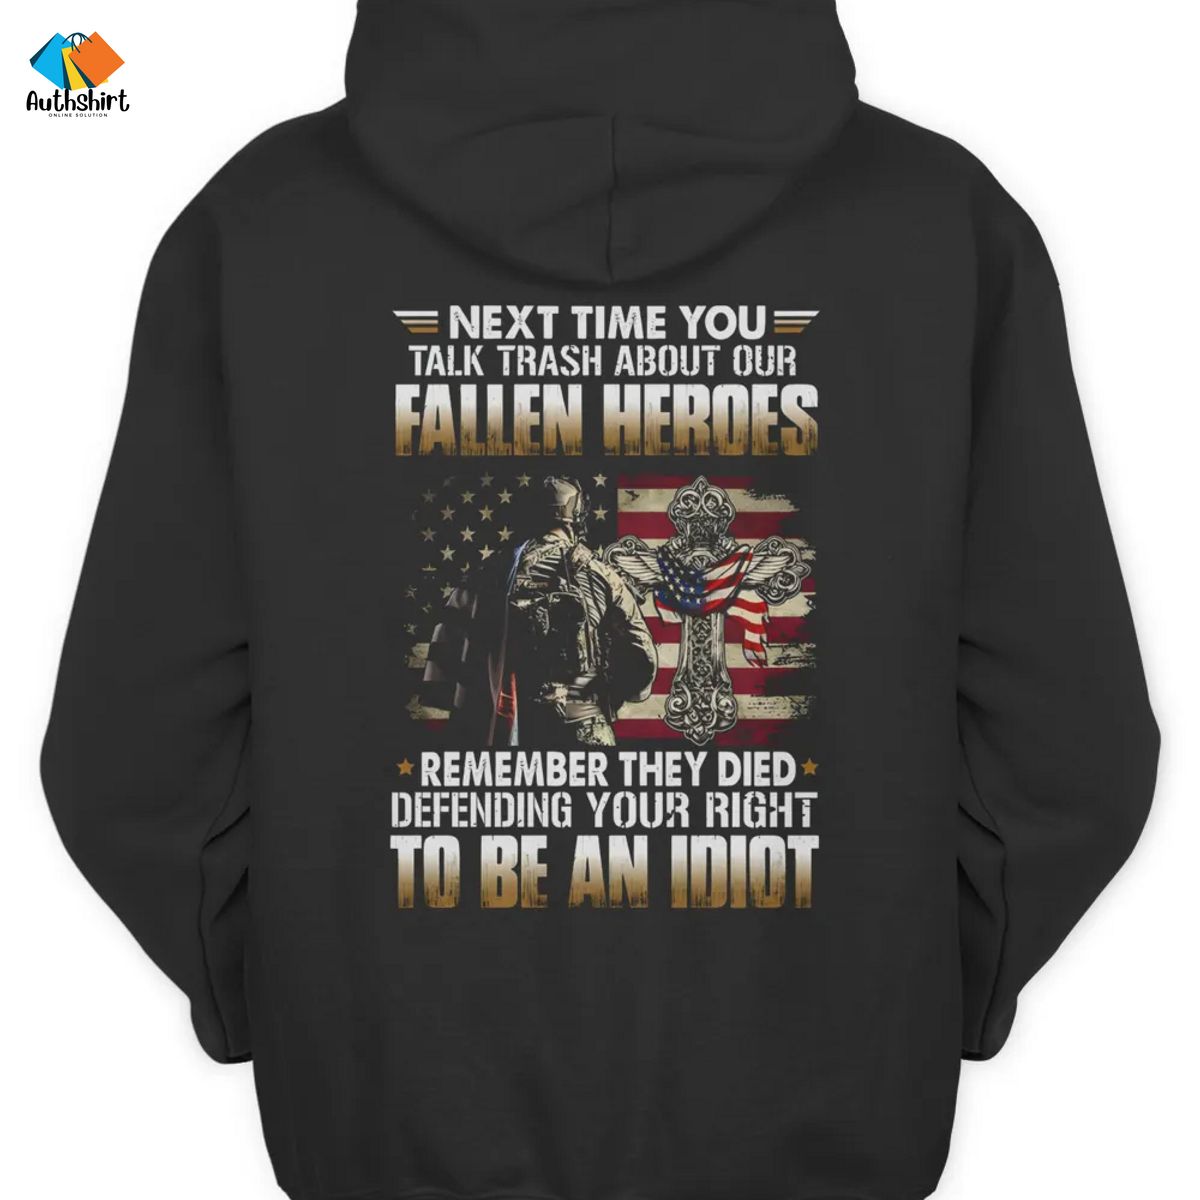 Veterans Next Time You Talk Trash About Our Fallen Heroes Remember They Died Defending Your Right To Be An Indiot Shirt